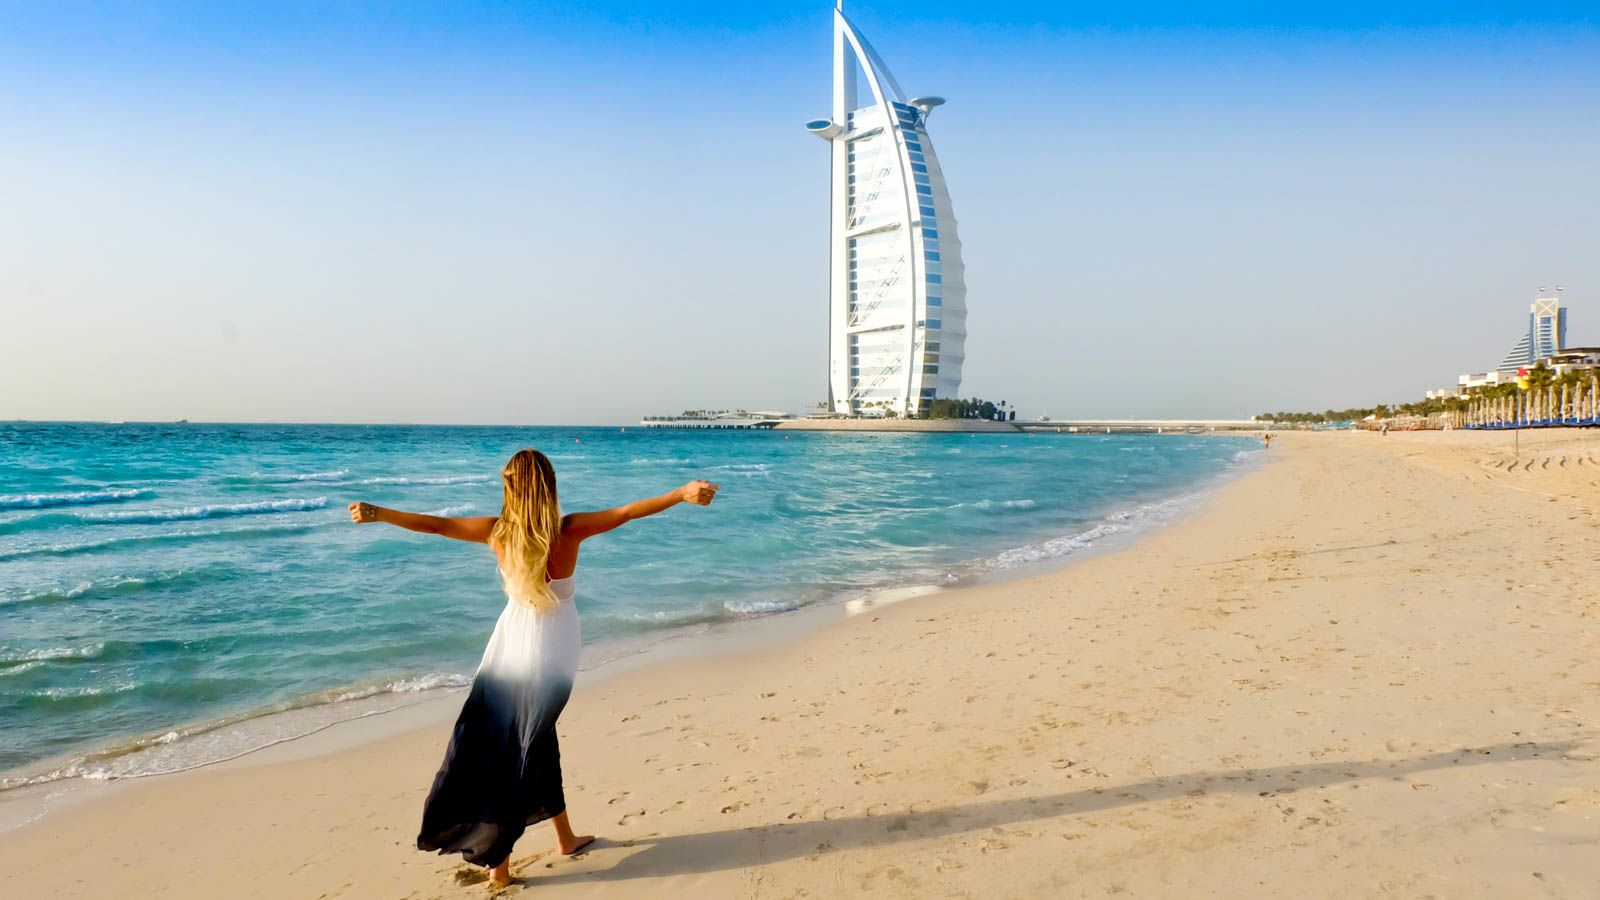 Inefficiënt Chaise longue fossiel 11 of the best beach spots you need to try in Dubai | CNN